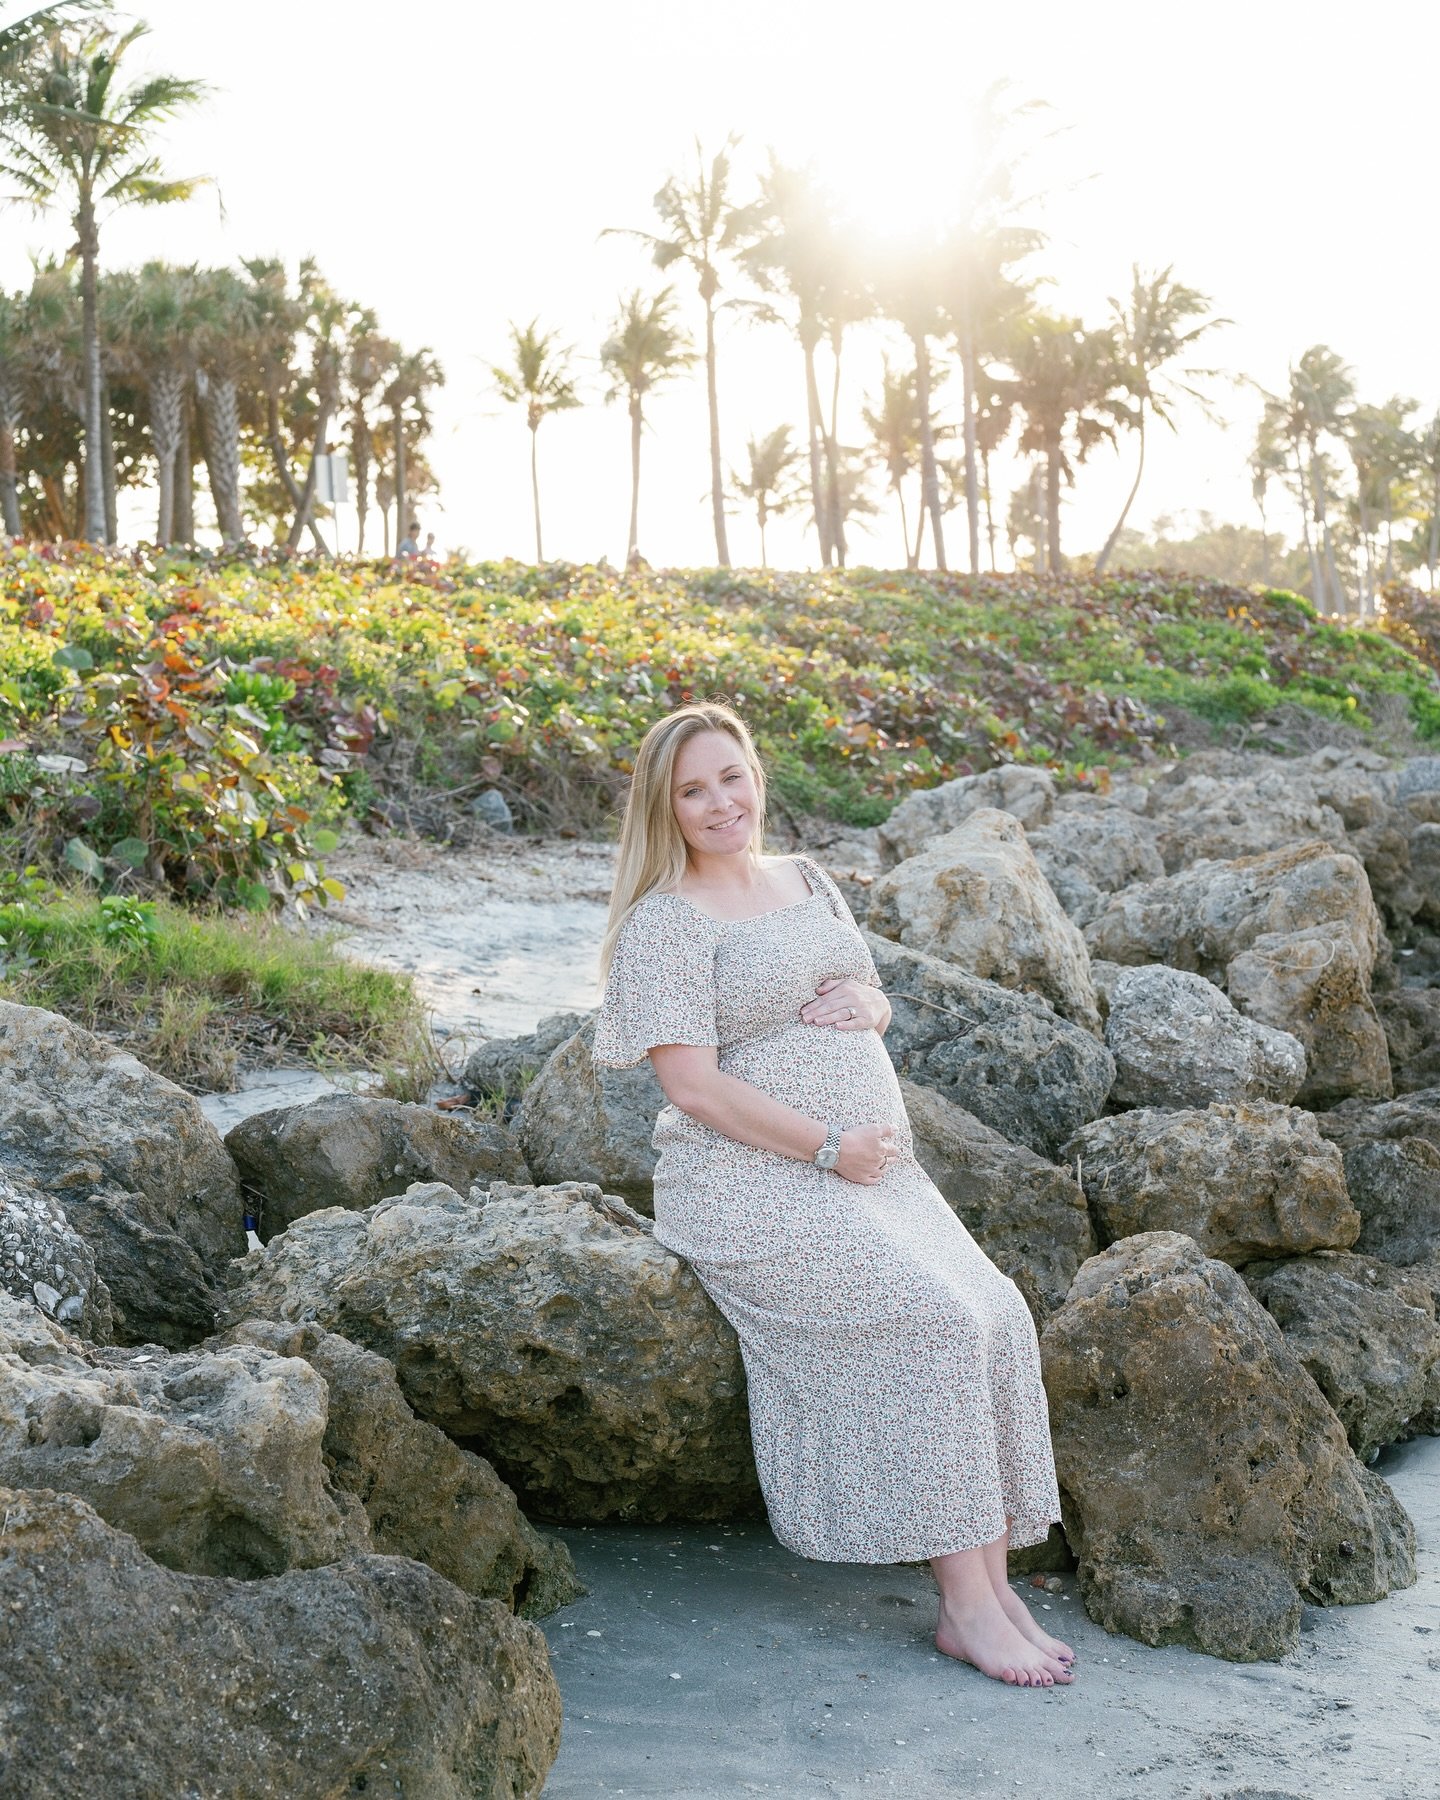 Embrace the glow of motherhood &ndash; don&rsquo;t skip maternity sessions. Every moment of feeling beautiful during pregnancy is a memory worth cherishing. Whether it&rsquo;s your first, second, third &hellip; each season that brings new life deserv